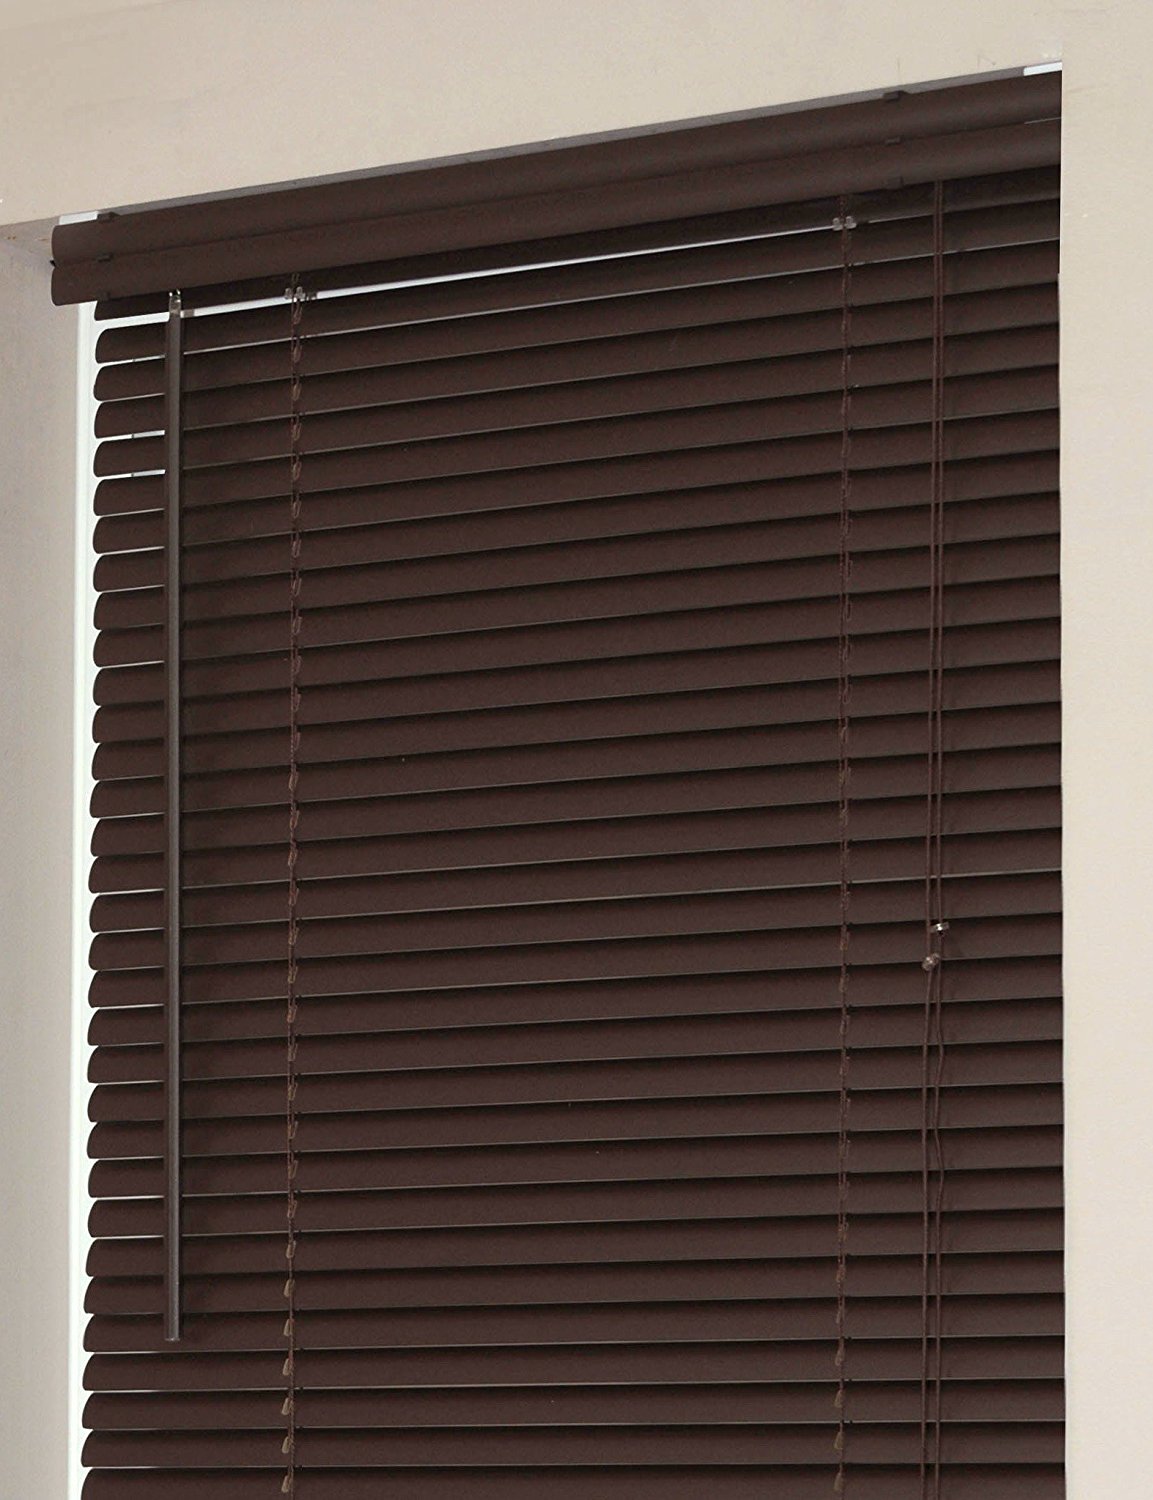 Achim Home Furnishings Morning Star 1-Inch Mini Blinds, 27 by 64-Inch, Chocolate